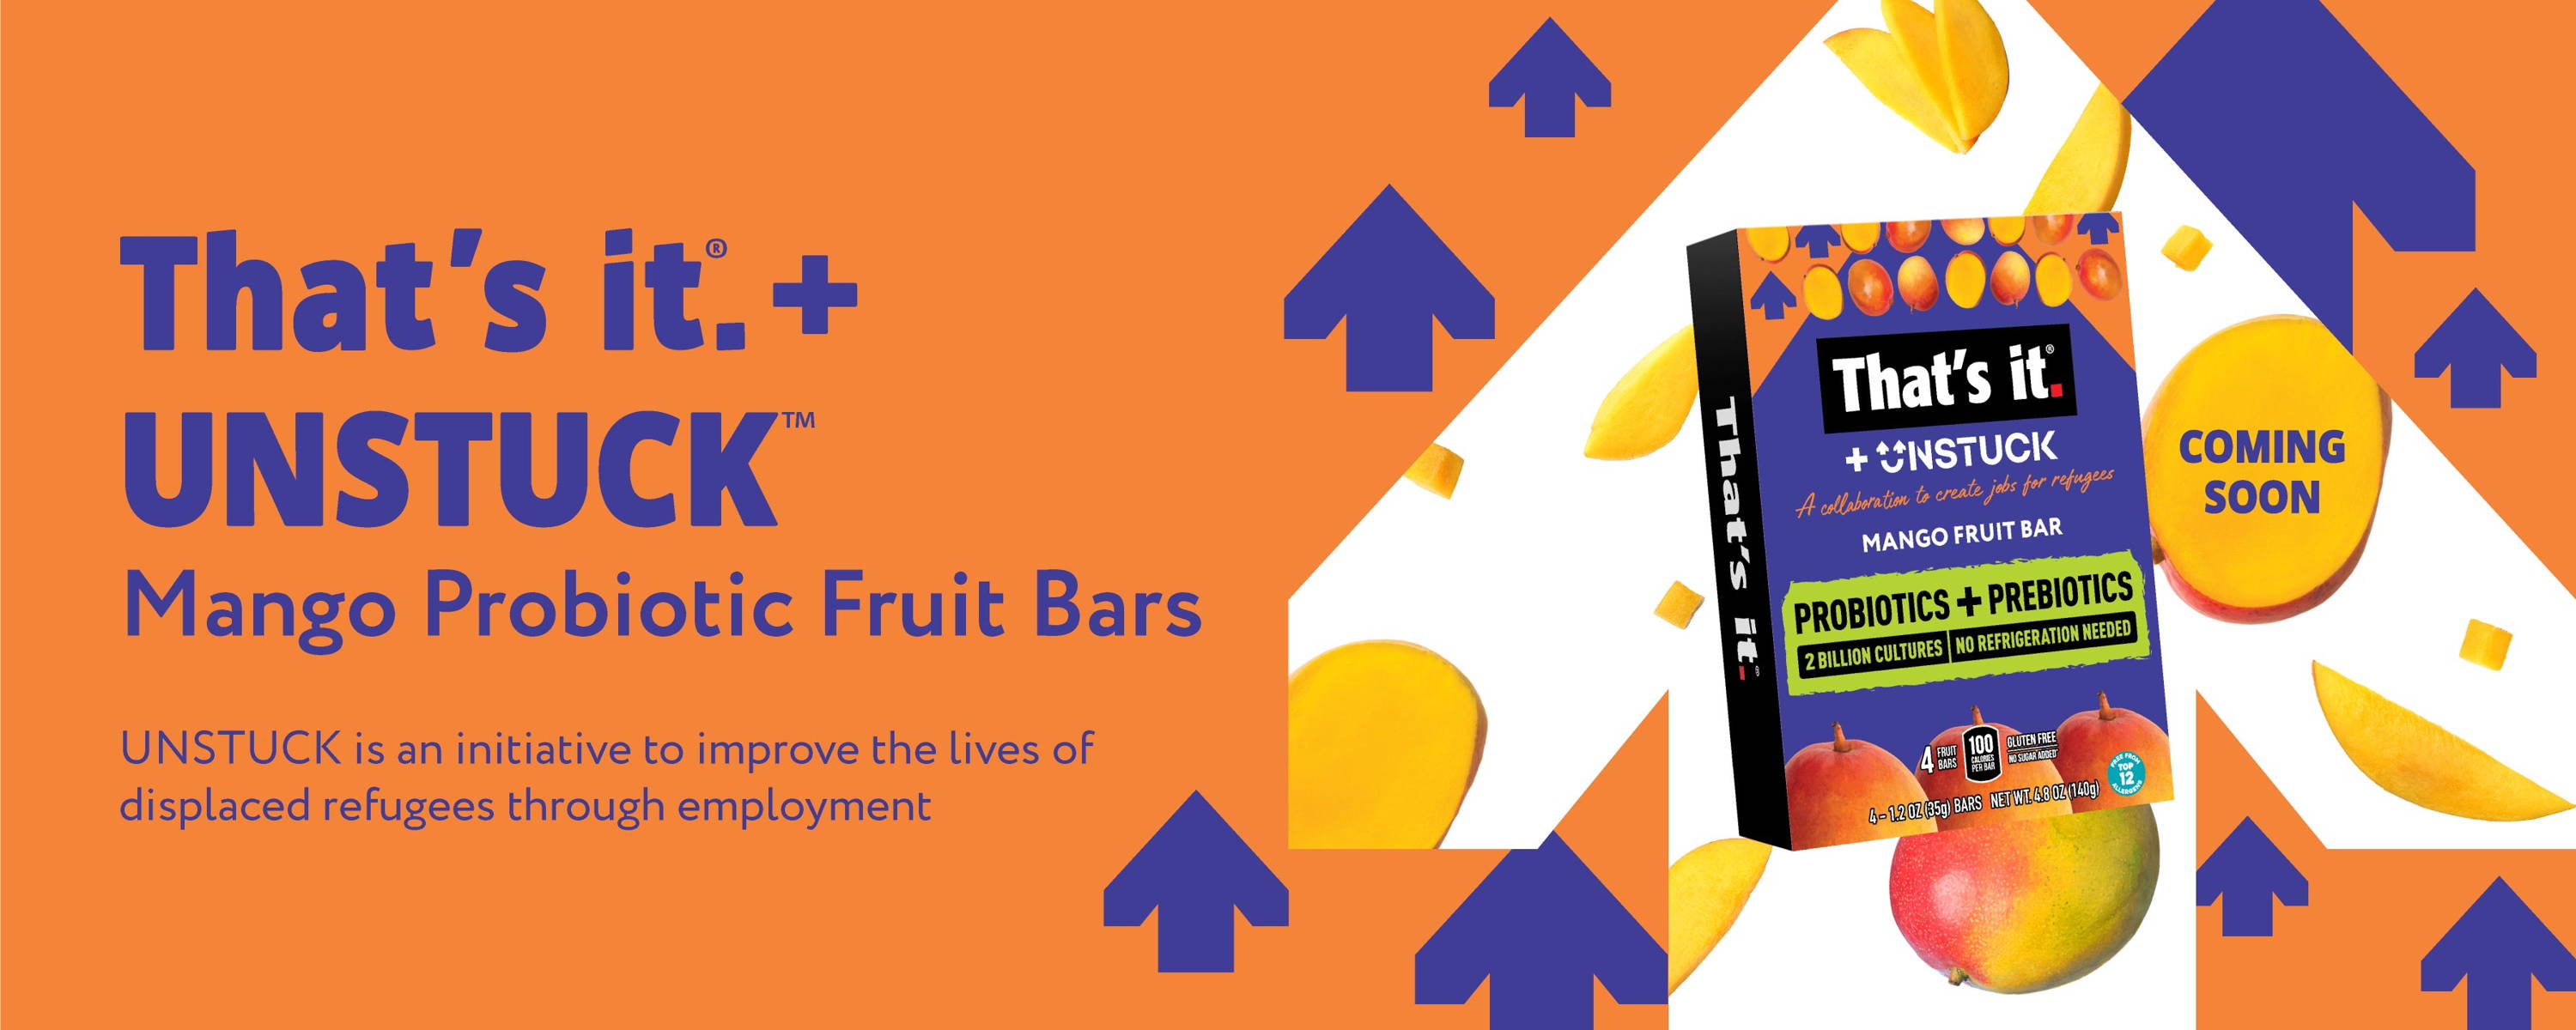 THAT'S IT. AND UNSTUCK MANGO PROBIOTIC FRUIT BARS  UNSTUCK is an initiative to improve the lives of displaced refugees through employment